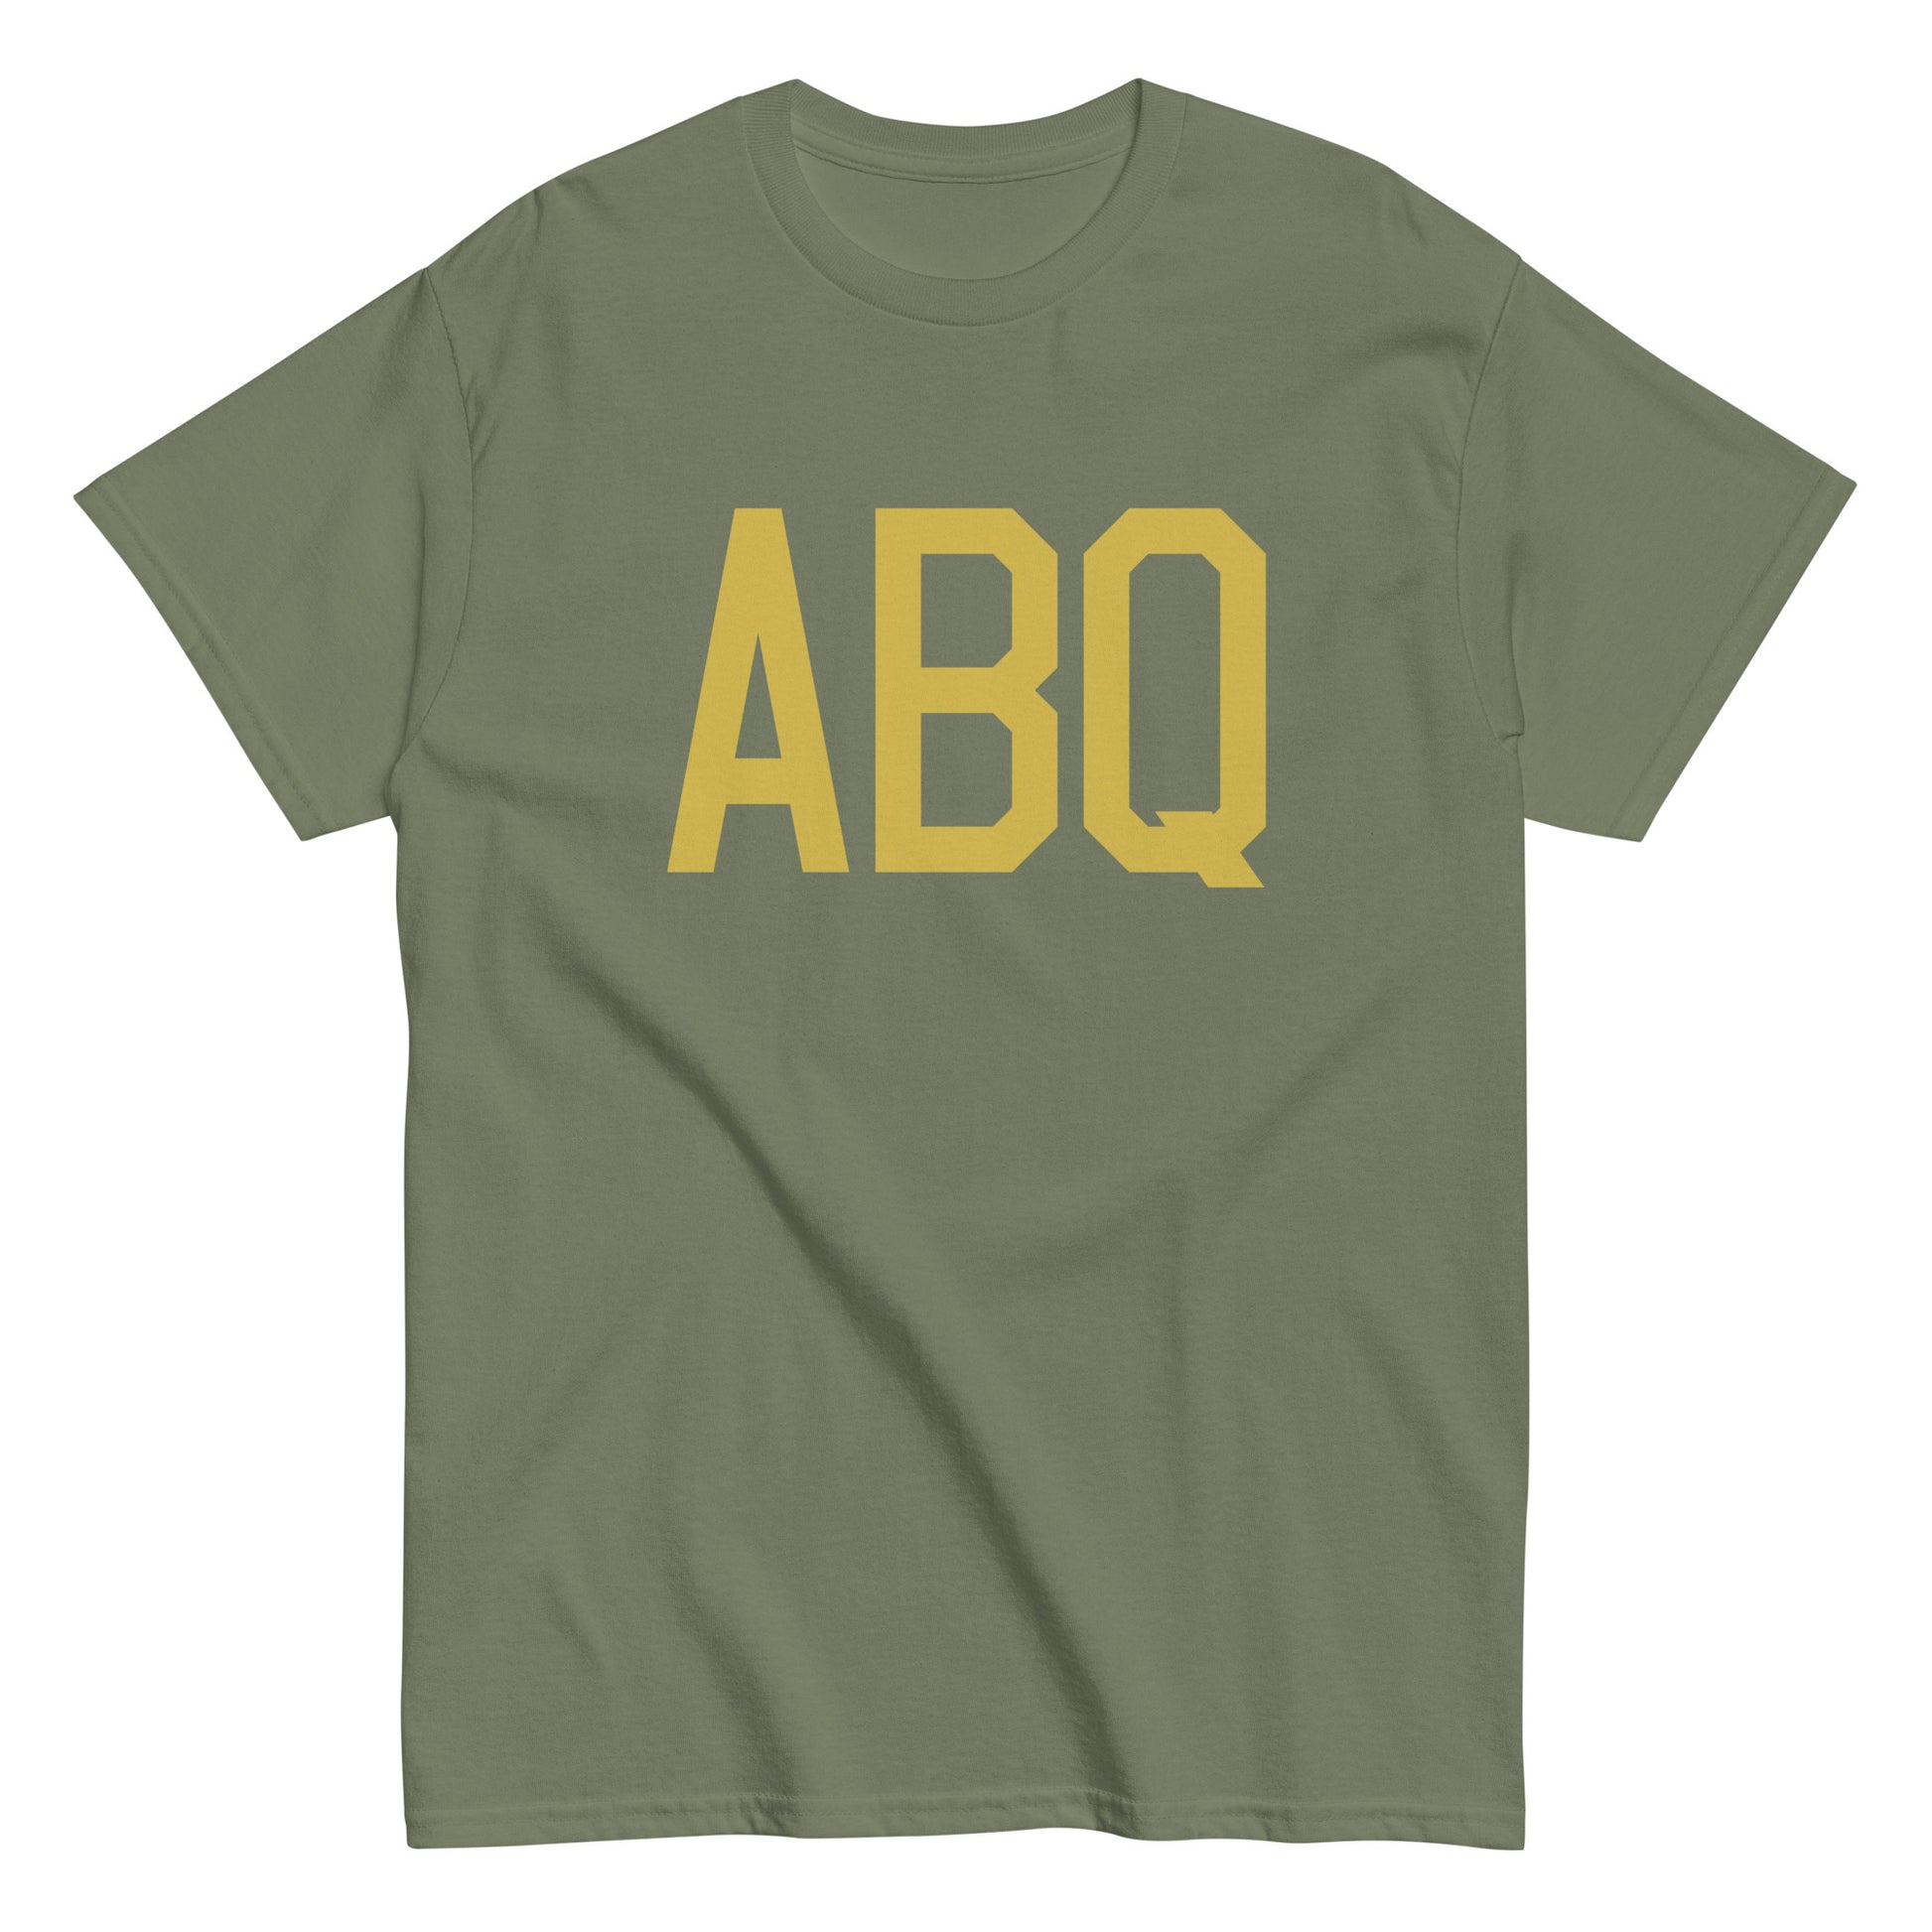 Aviation Enthusiast Men's Tee - Old Gold Graphic • ABQ Albuquerque • YHM Designs - Image 02